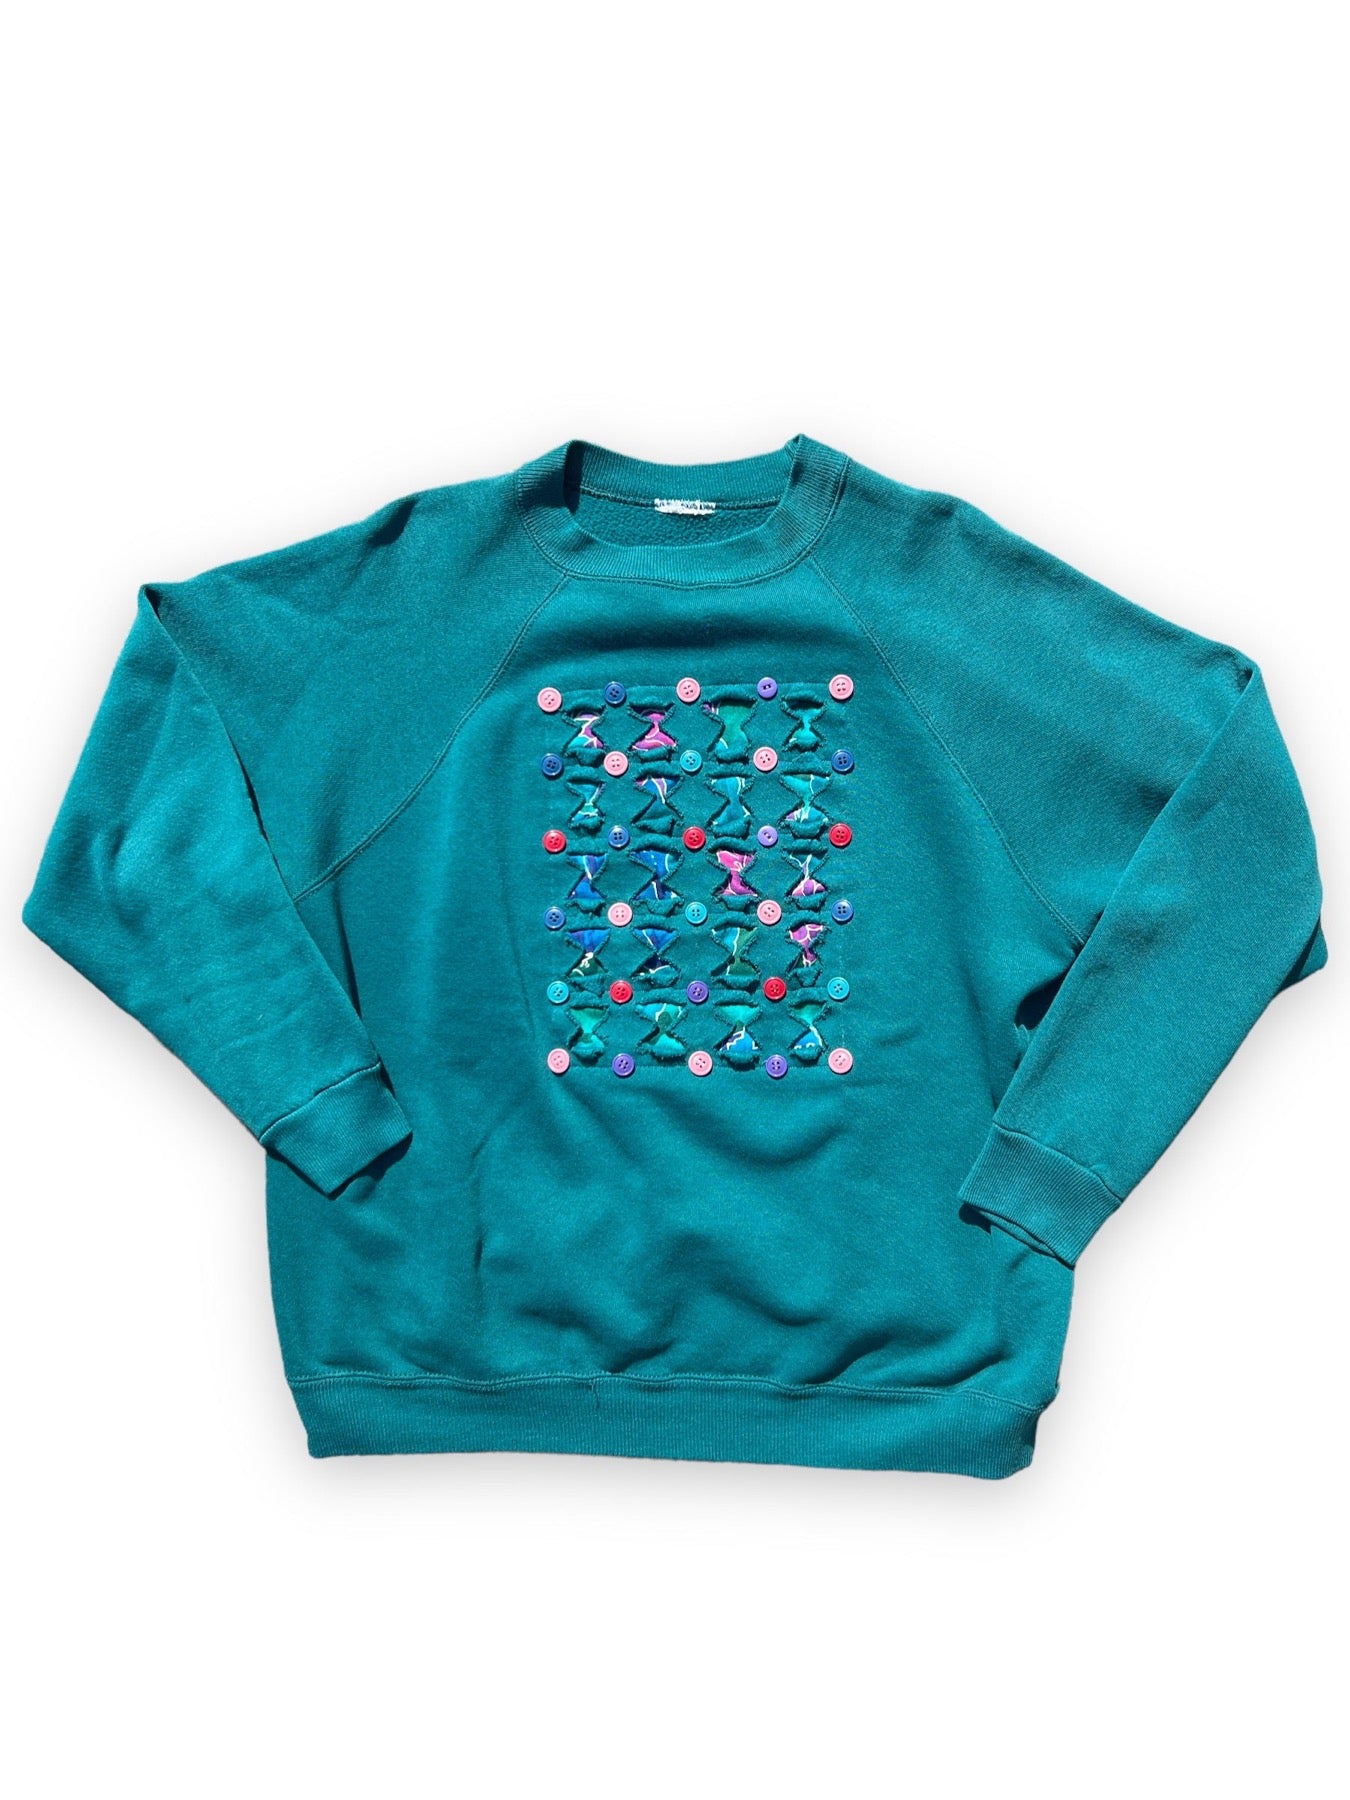 BUTTONS & BOWS TEAL SWEATSHIRT